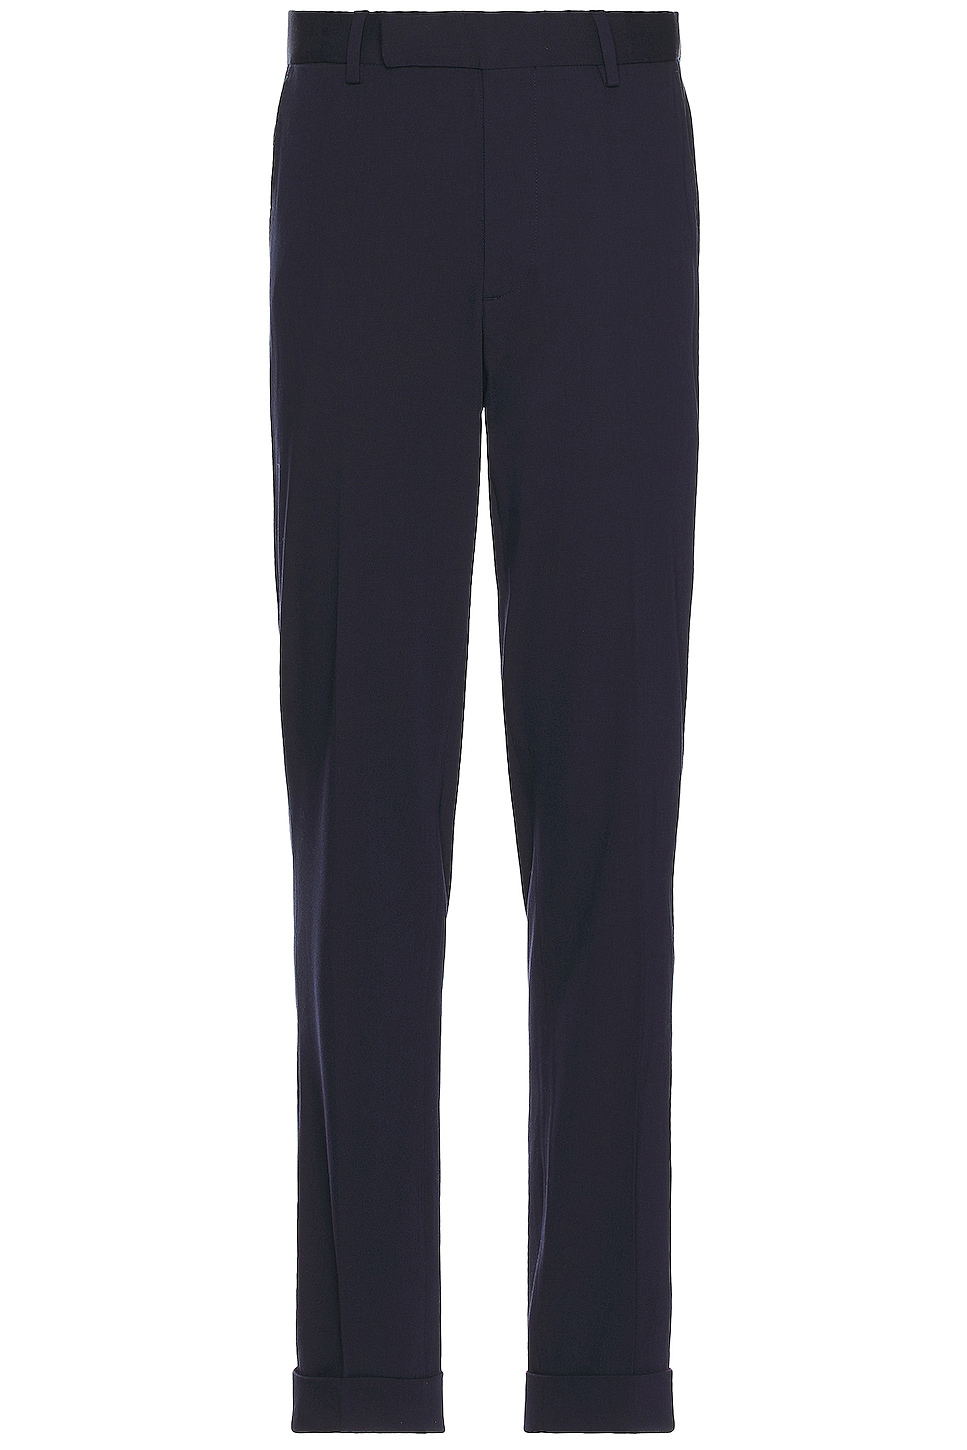 Image 1 of Polo Ralph Lauren Tailored Pant in Navy